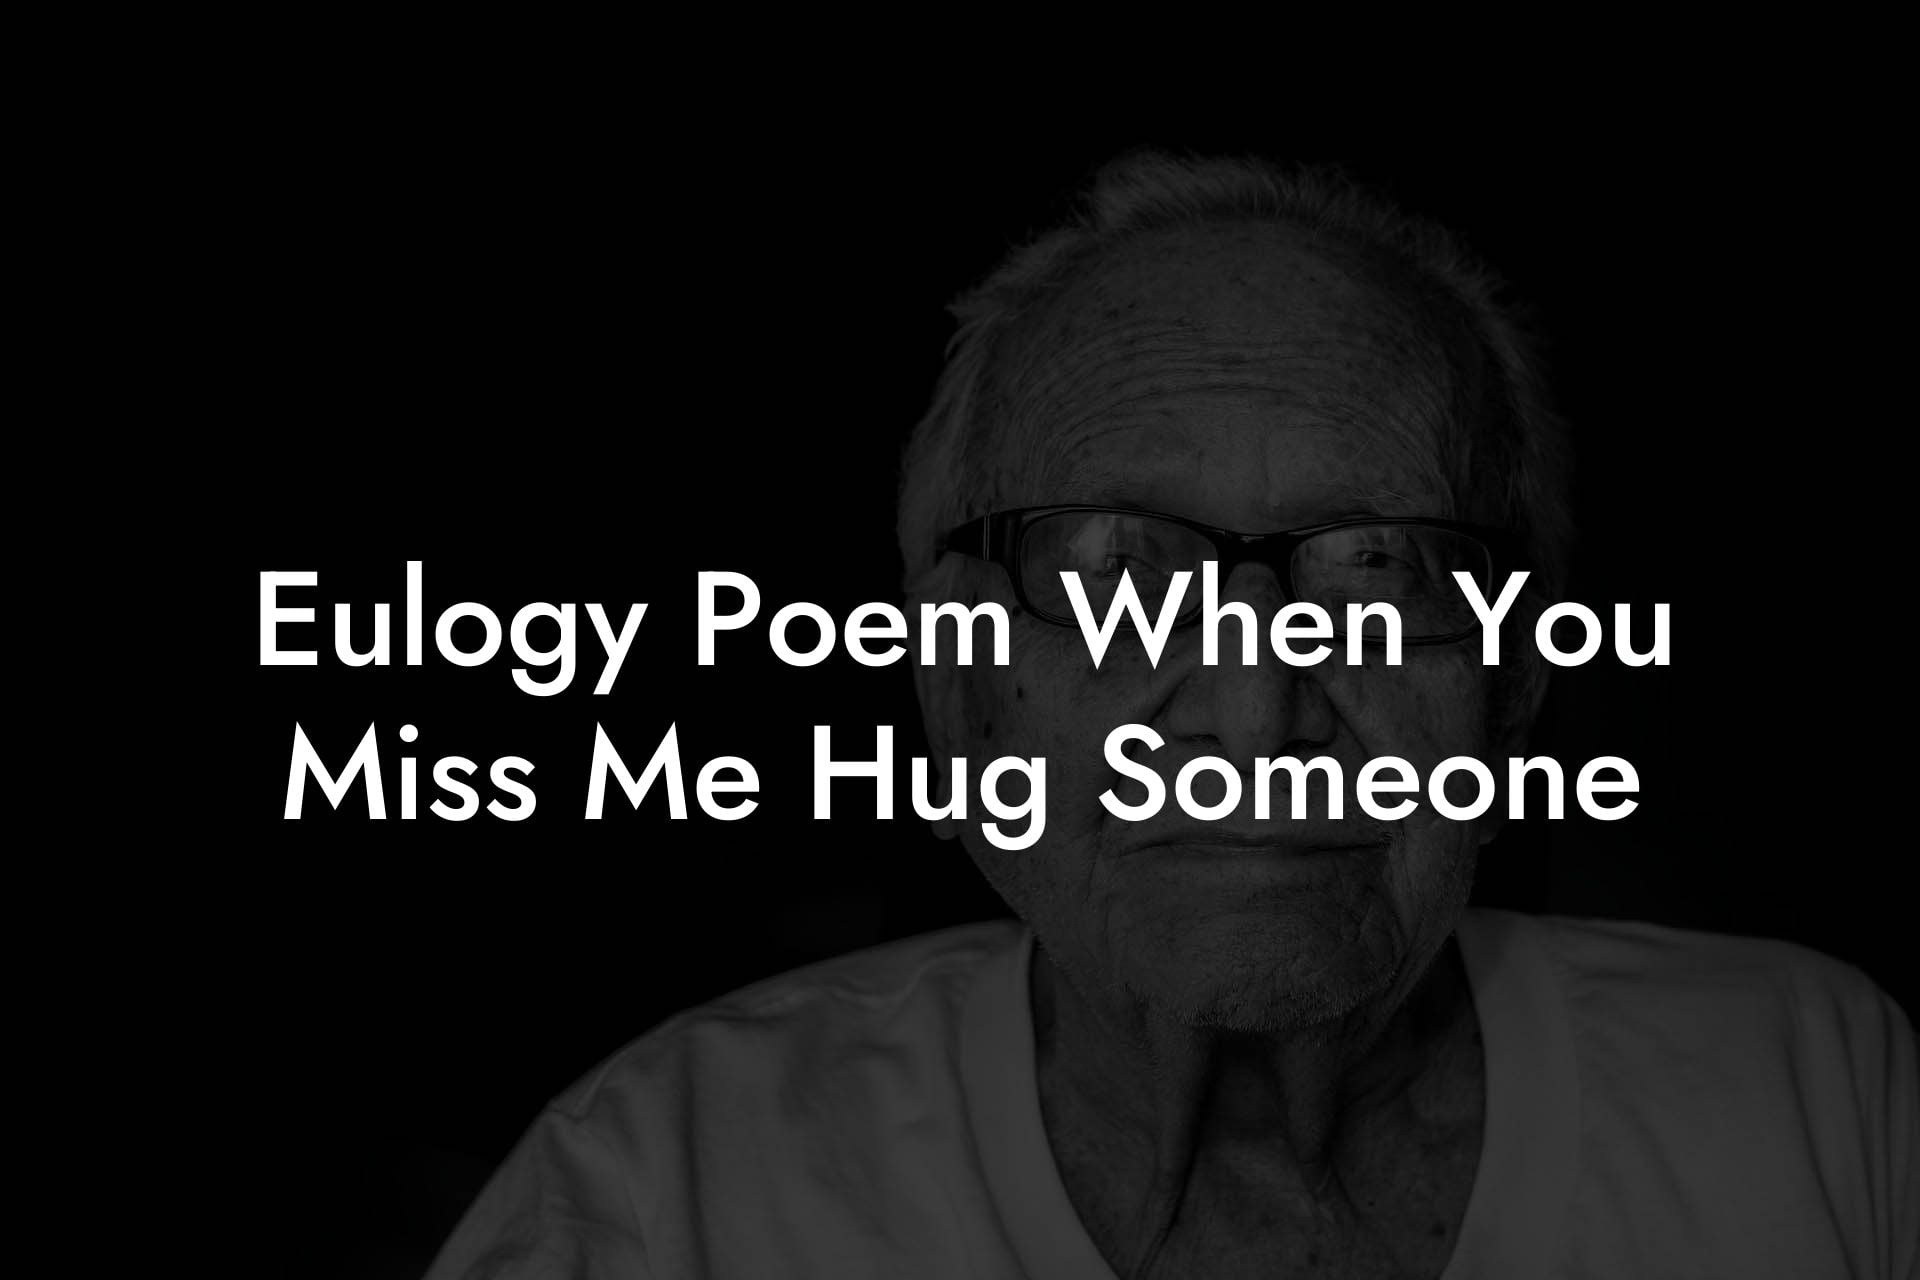 Eulogy Poem When You Miss Me Hug Someone